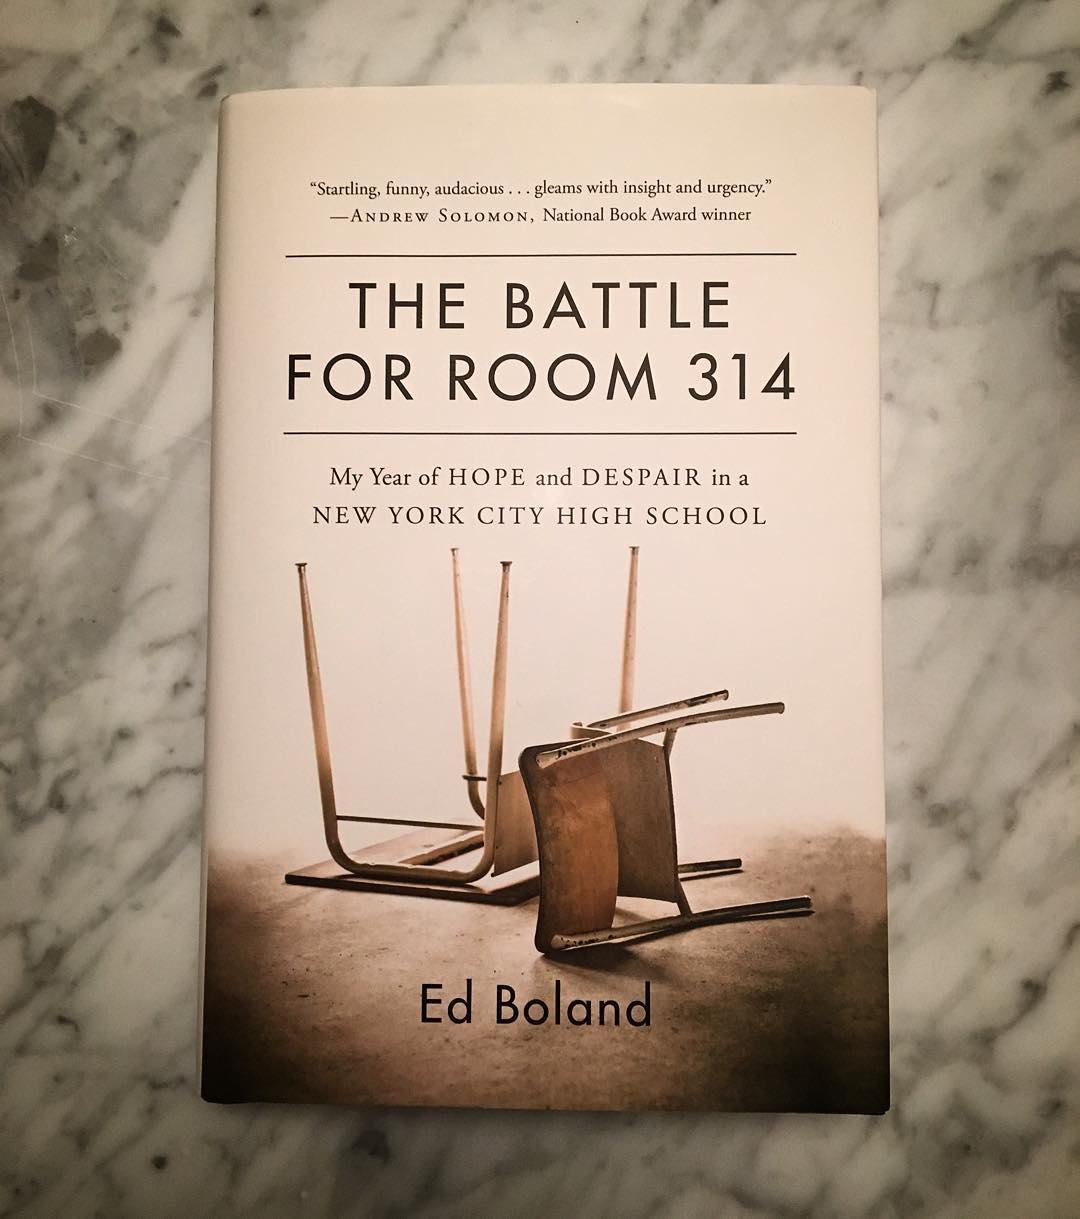 This powerful #memoir about #teaching in #NYC #publicschool, #thebattleforroom314, just came out today from my husband, @eddiemgbol, @hachettebooks, @grandcentralpub. You can find it here: http://www.amazon.com/The-Battle-Room-314-Despair/dp/1455560618